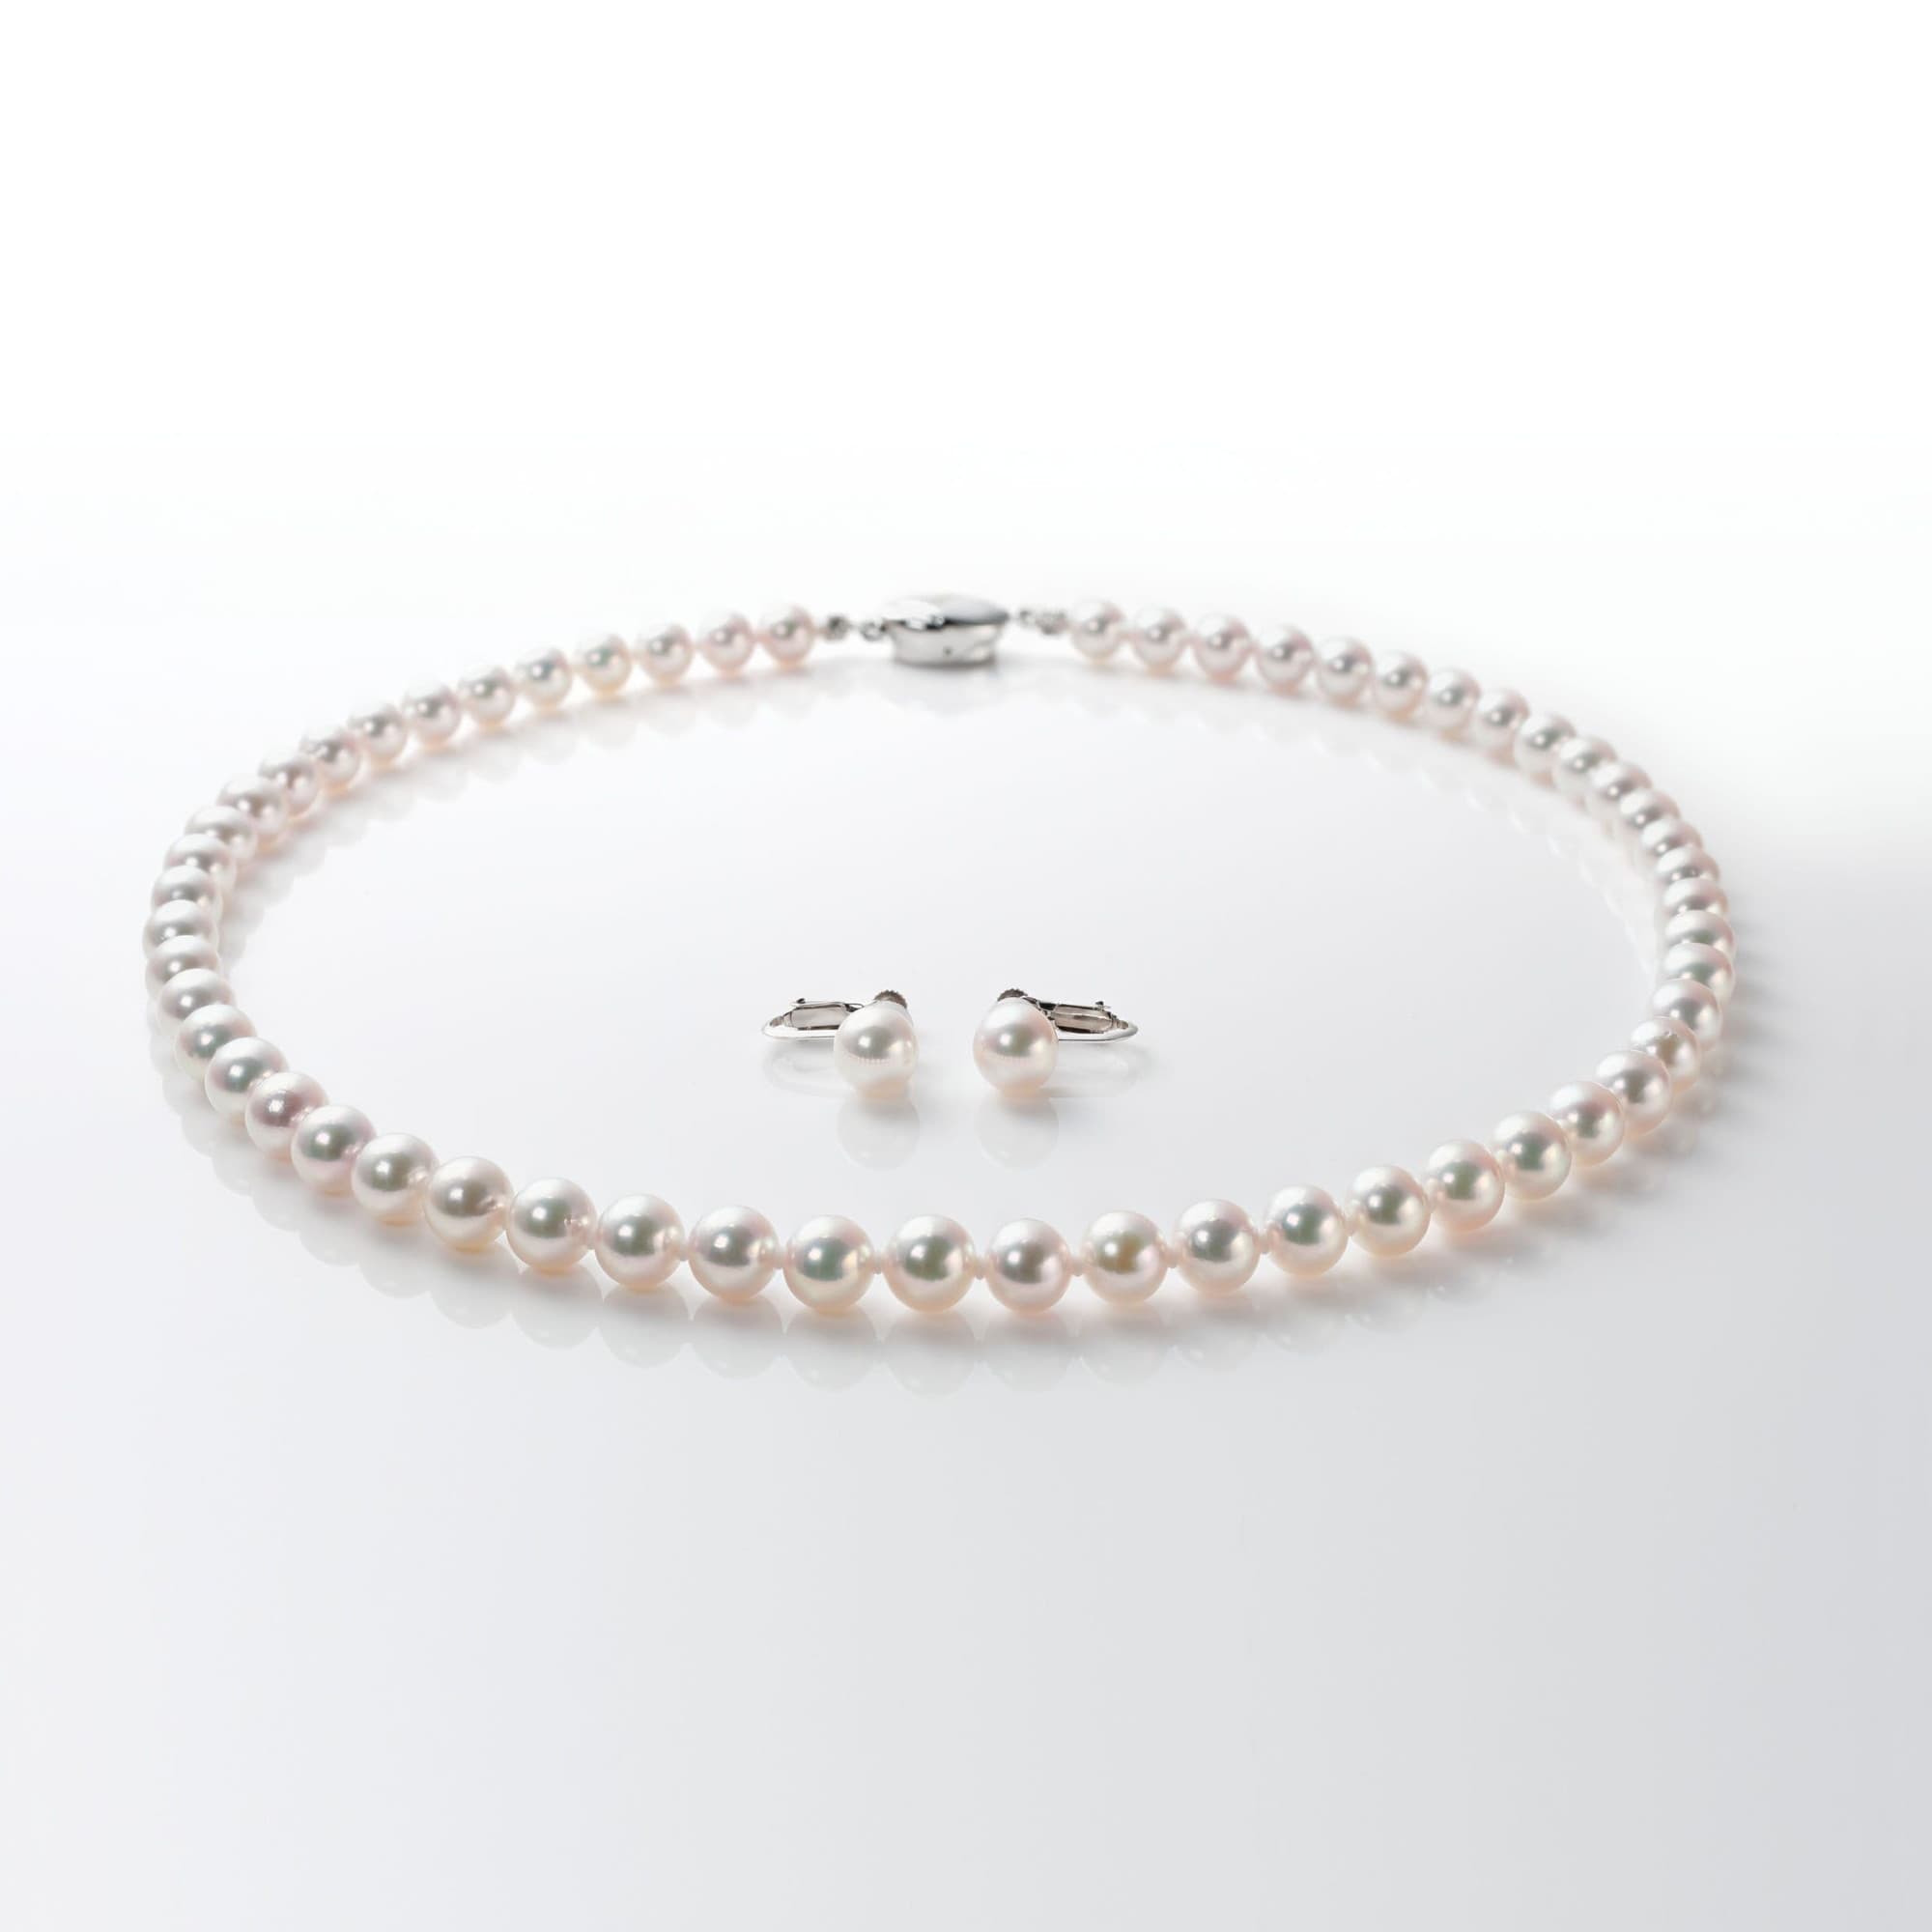 Akoya pearl necklace & pearl earrings set【M】/アコヤ真珠ネックレス＆イヤリングセット Mサイズ-1